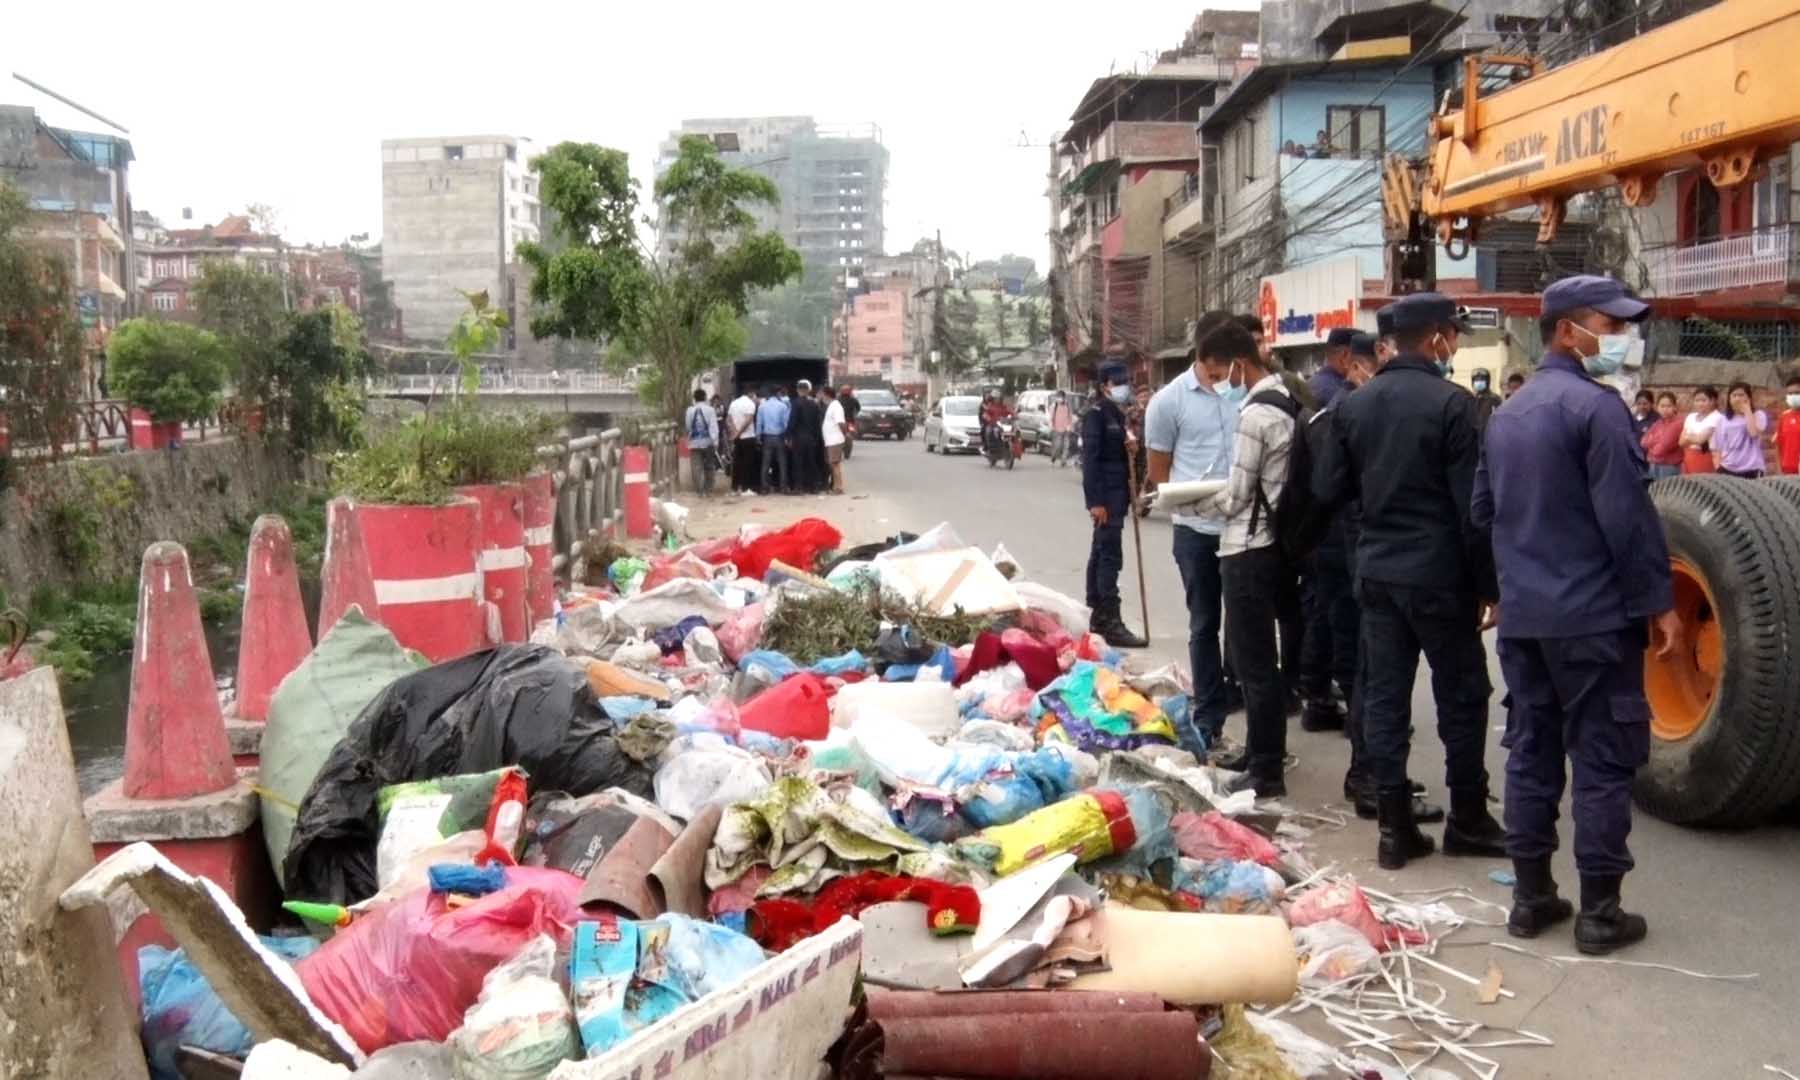 Body of newborn baby found on garbage pile in Kathmandu (With video)